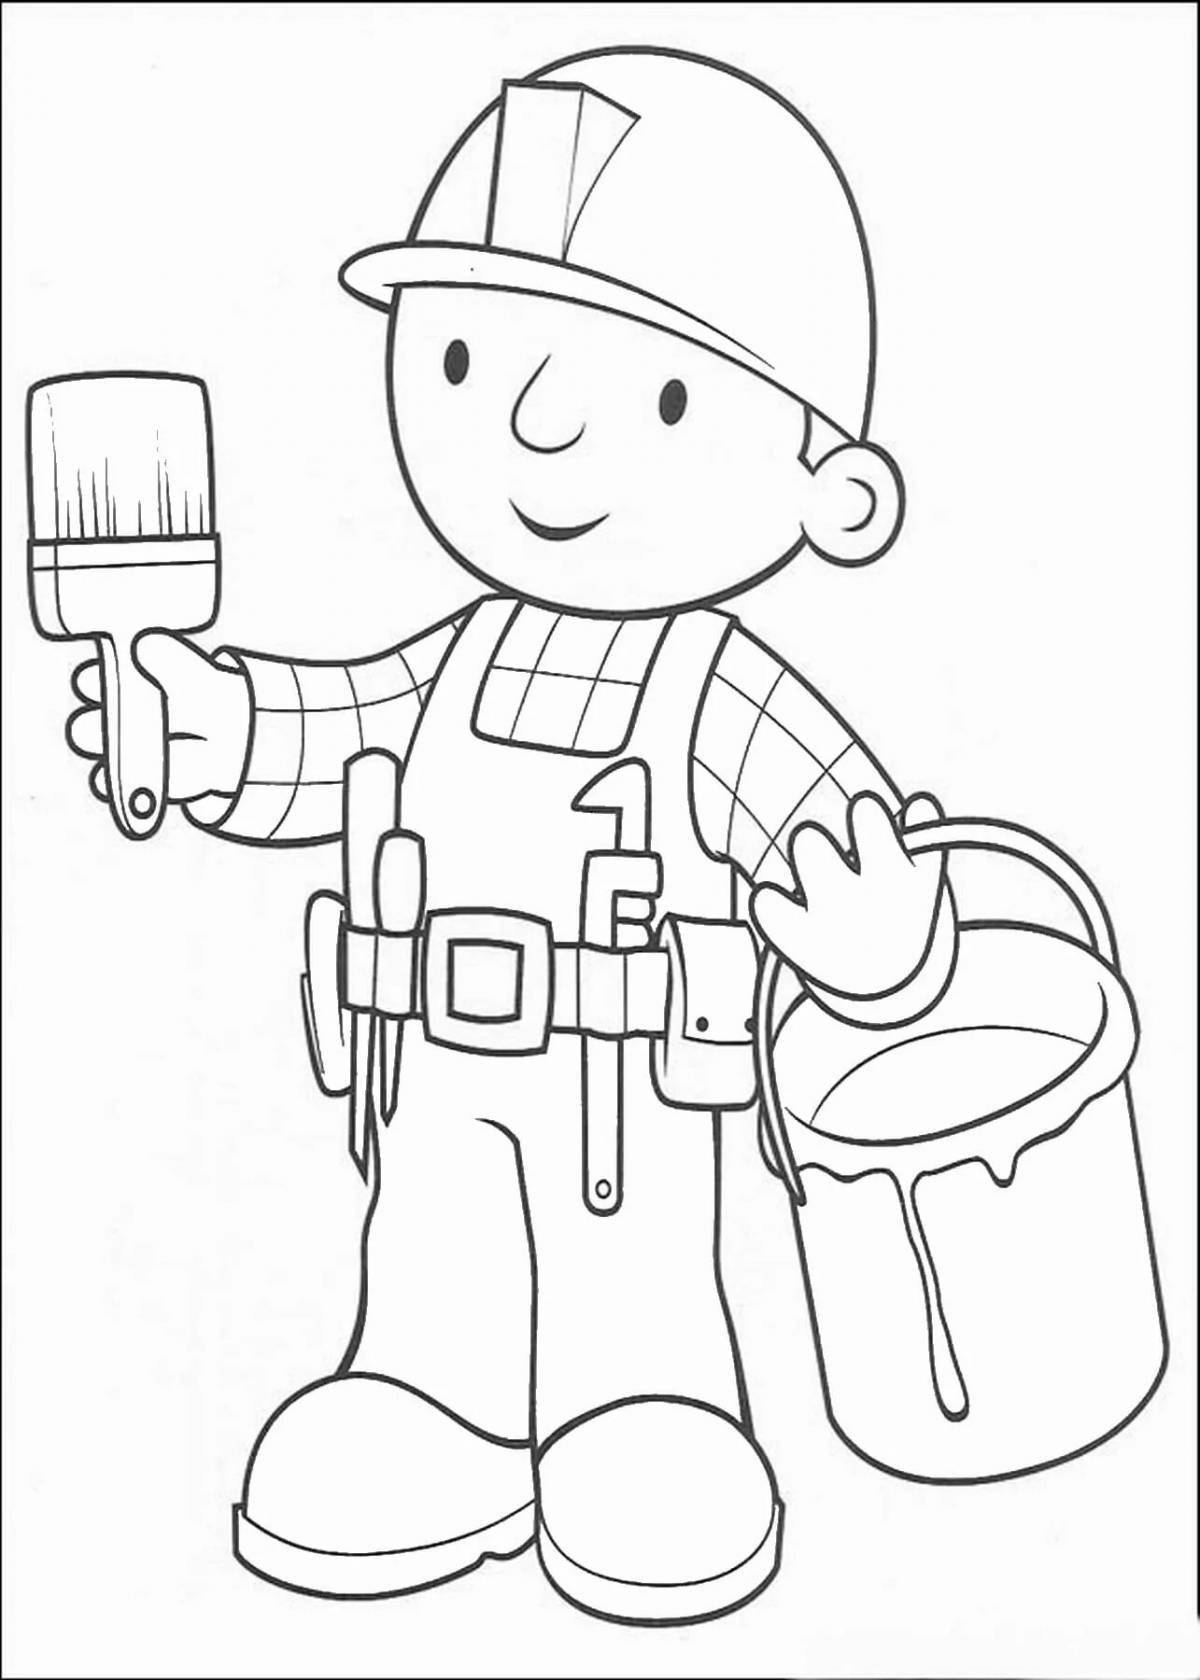 Colourful occupational safety coloring book for children